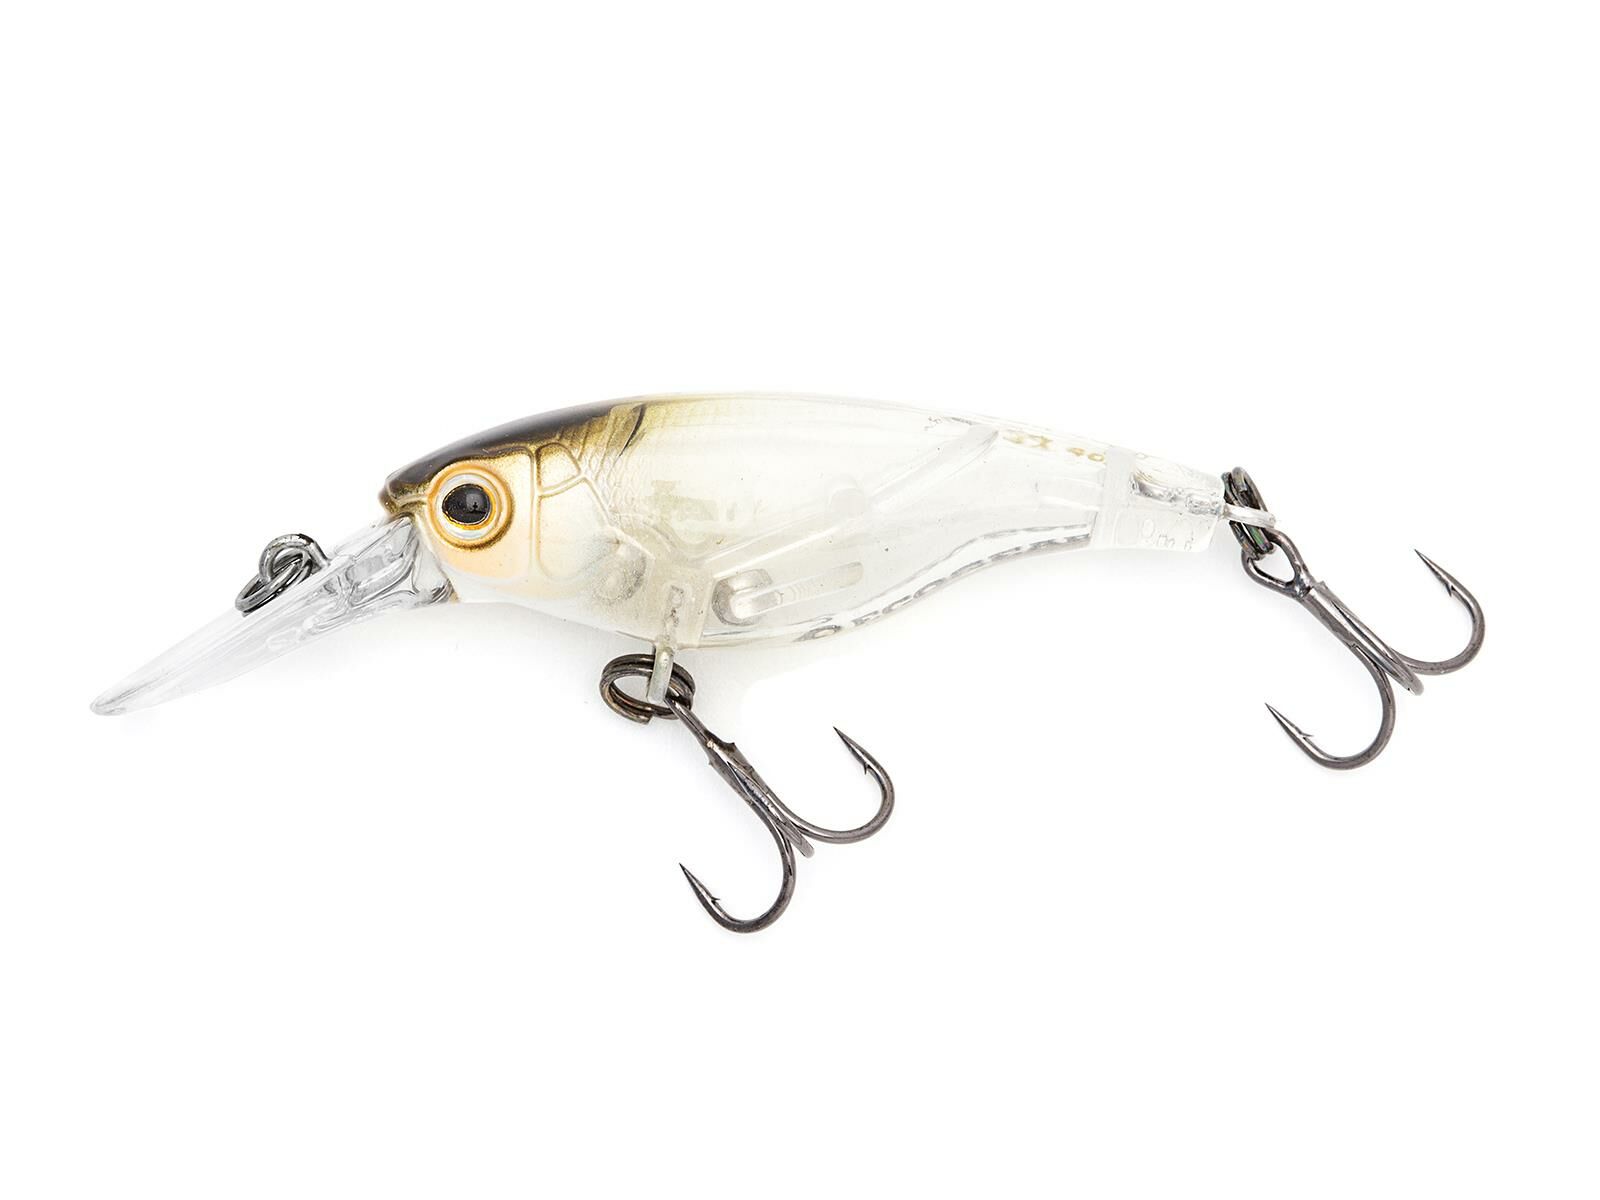 SX 40LC (369) Brown Shad